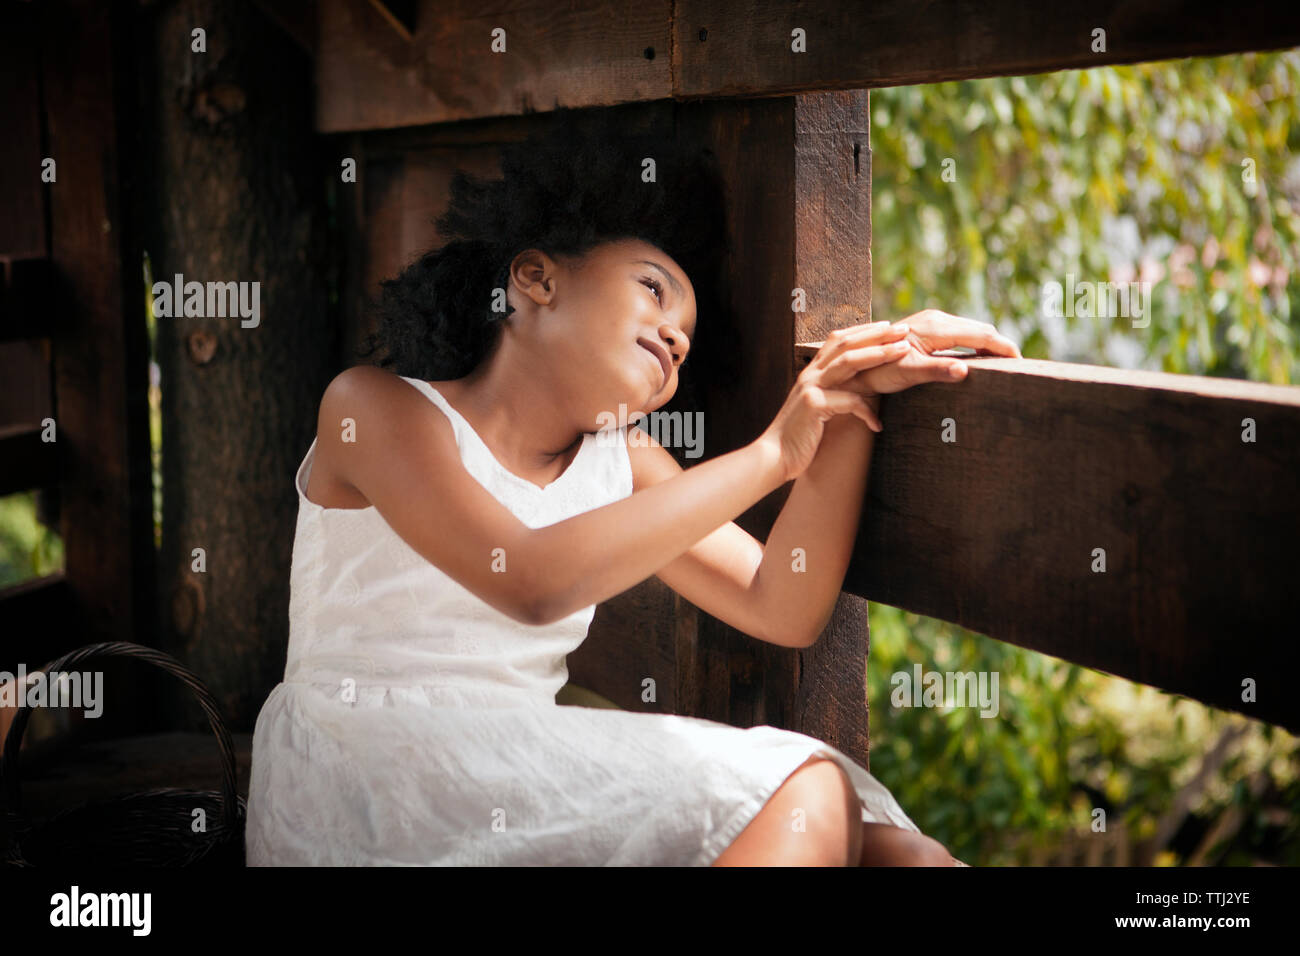 Smiling girl sitting in tree house Stock Photo